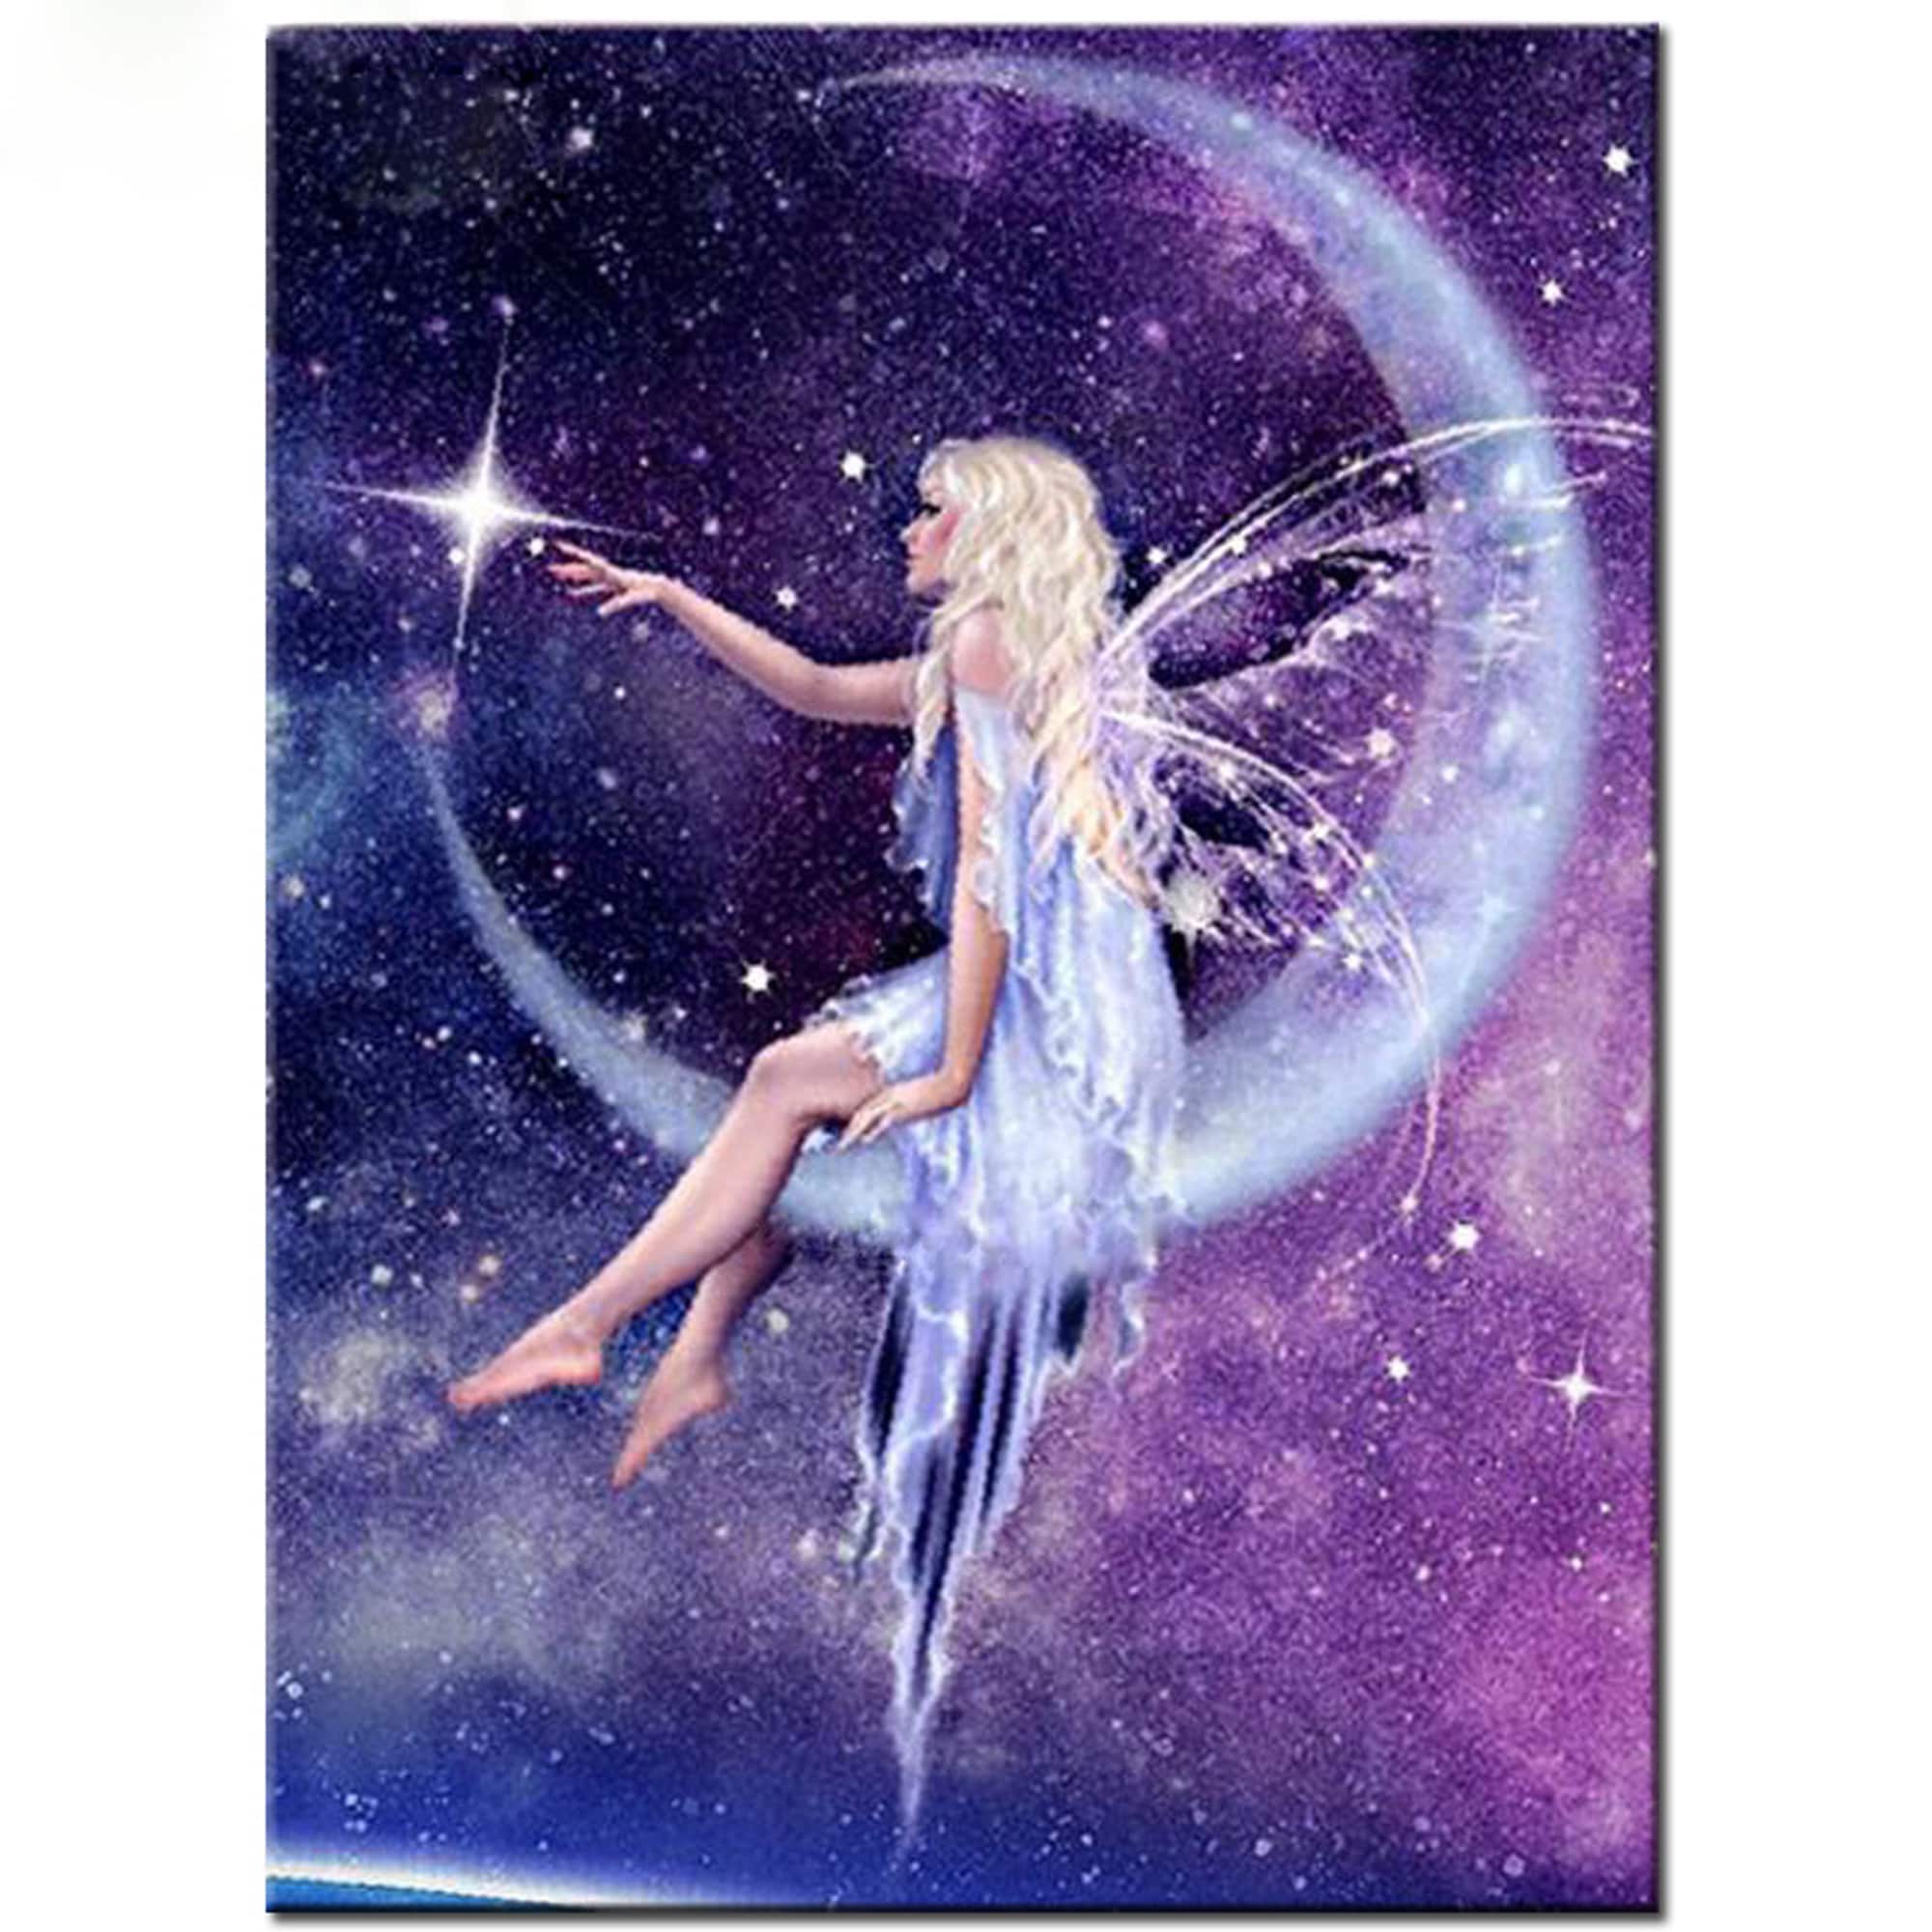 Stitch and Angel Diamond Painting Kits for Adults 20% Off Today – DIY Diamond  Paintings